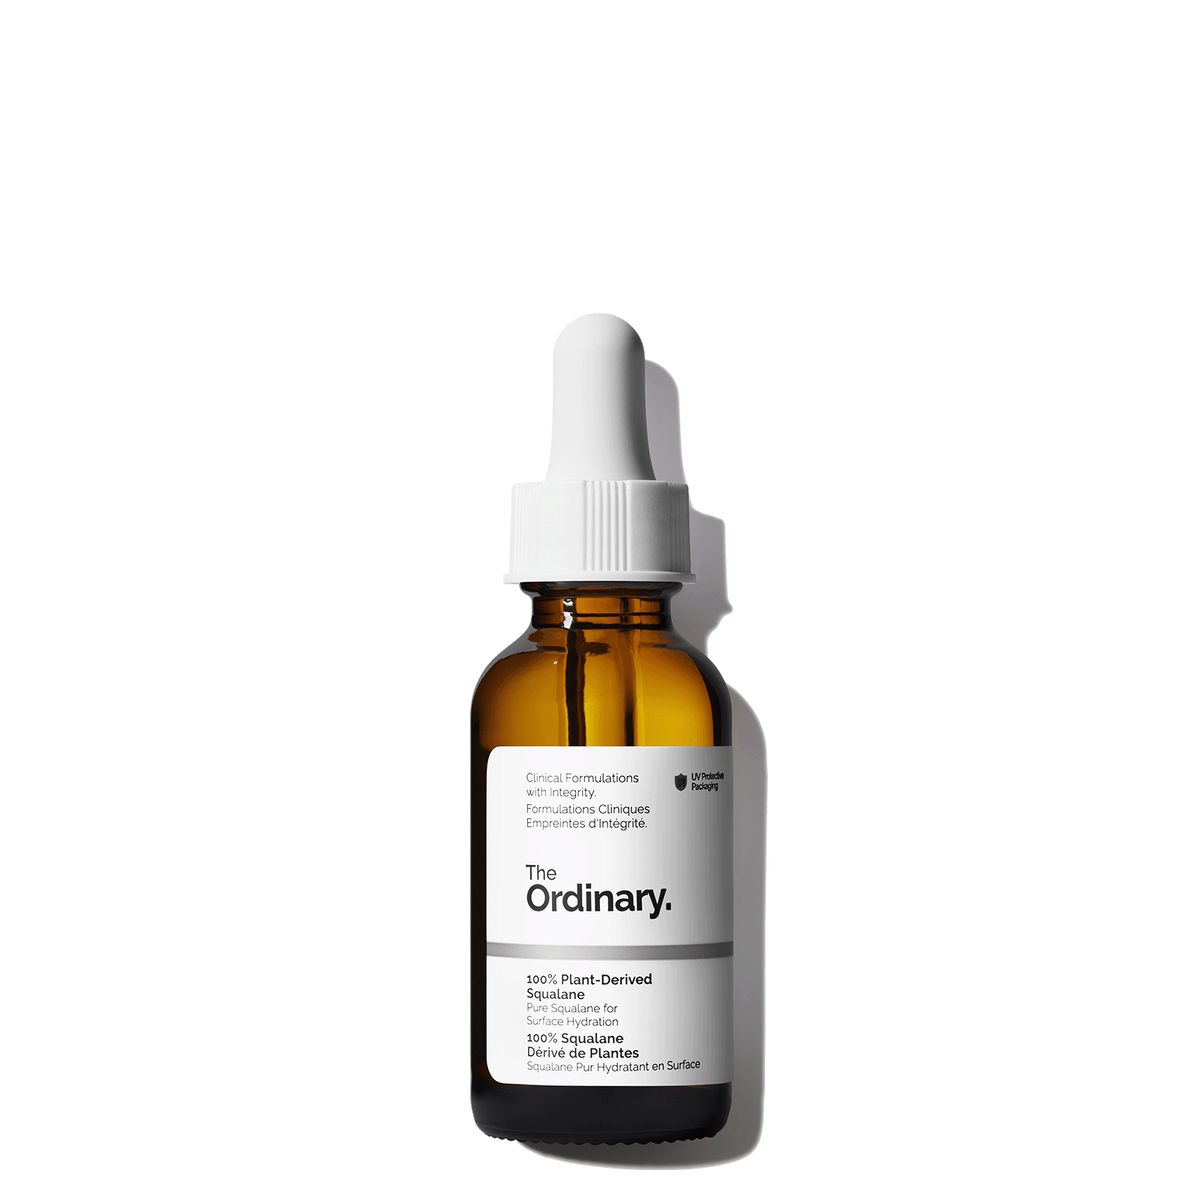 The Ordinary 100% Plant-Derived Squalane100% Plant-Derived Squalane | The Ordinary